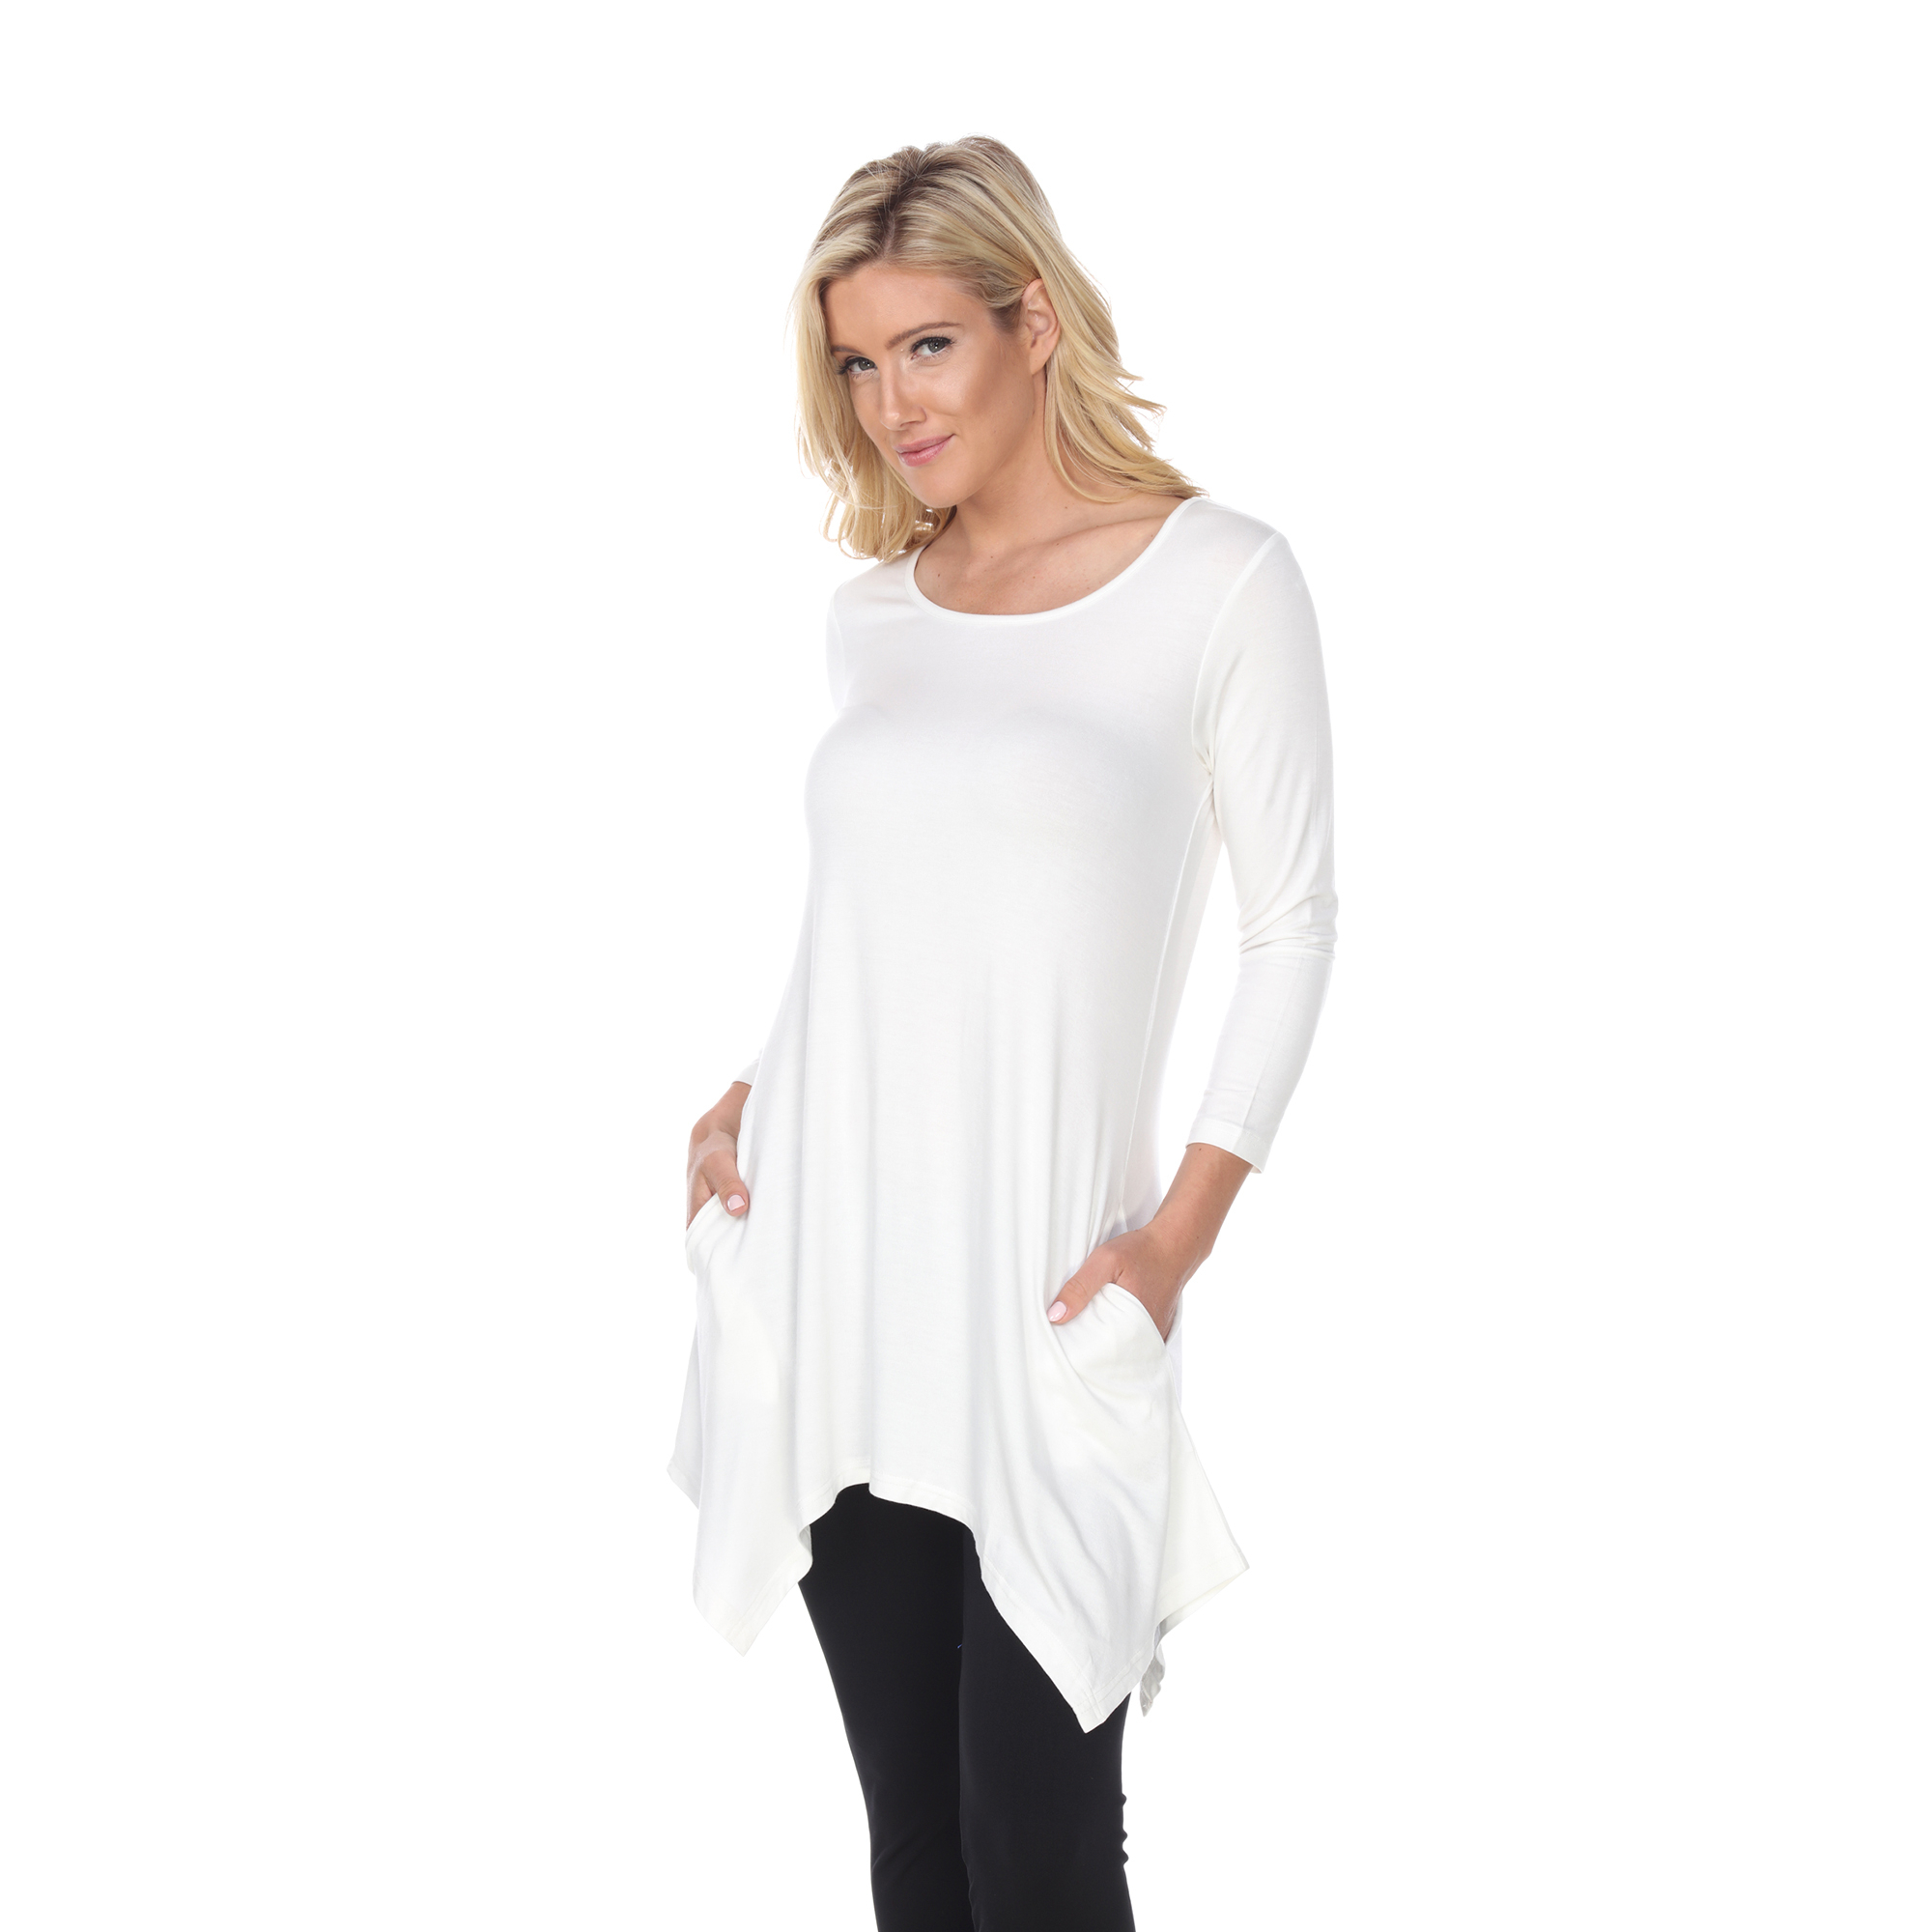 White Mark Women's Quarter Sleeve Tunic Top With Pockets - White, 1X